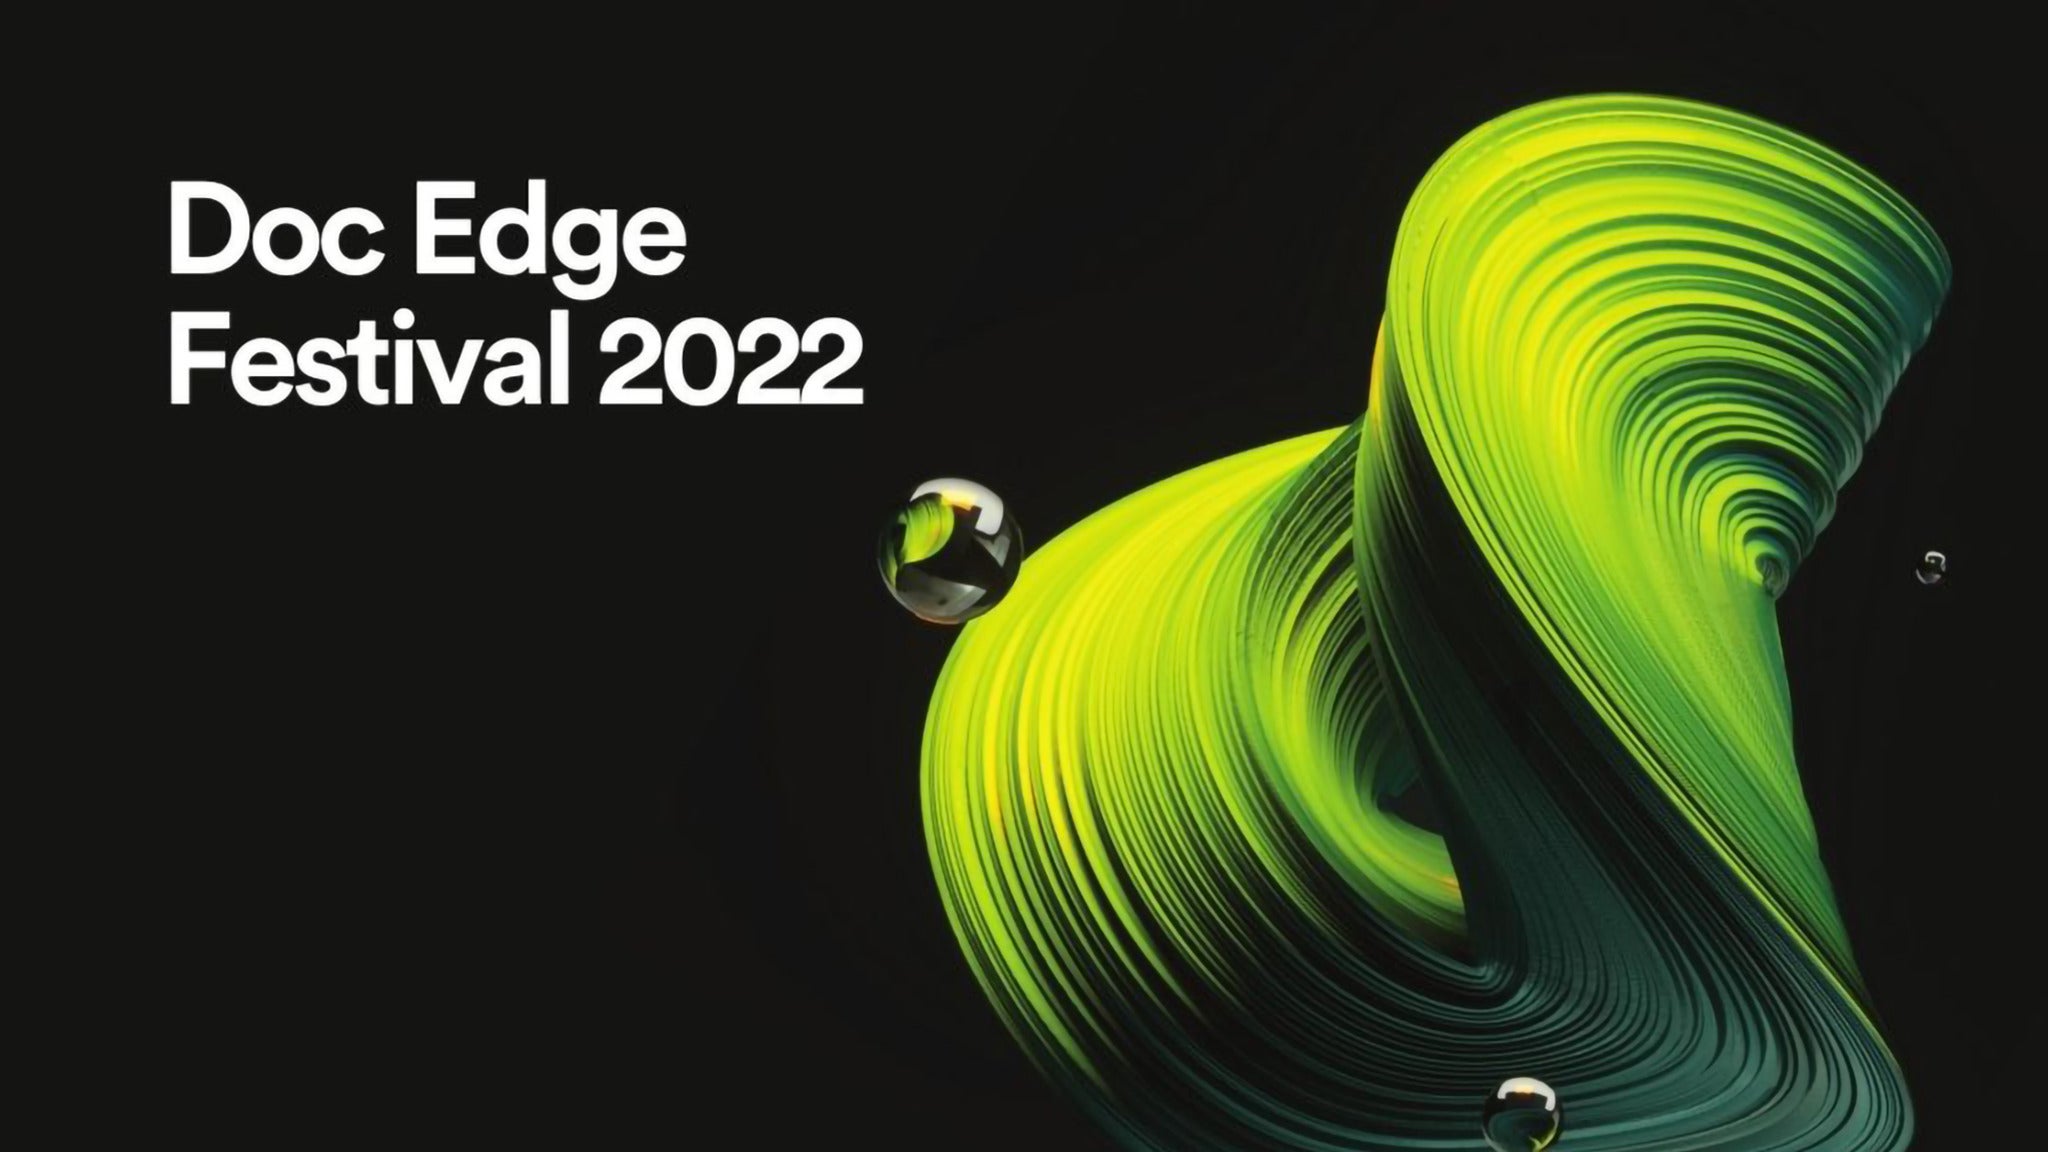 Image used with permission from Ticketmaster | Doc Edge Film Festival 2022: Hide & Seek tickets